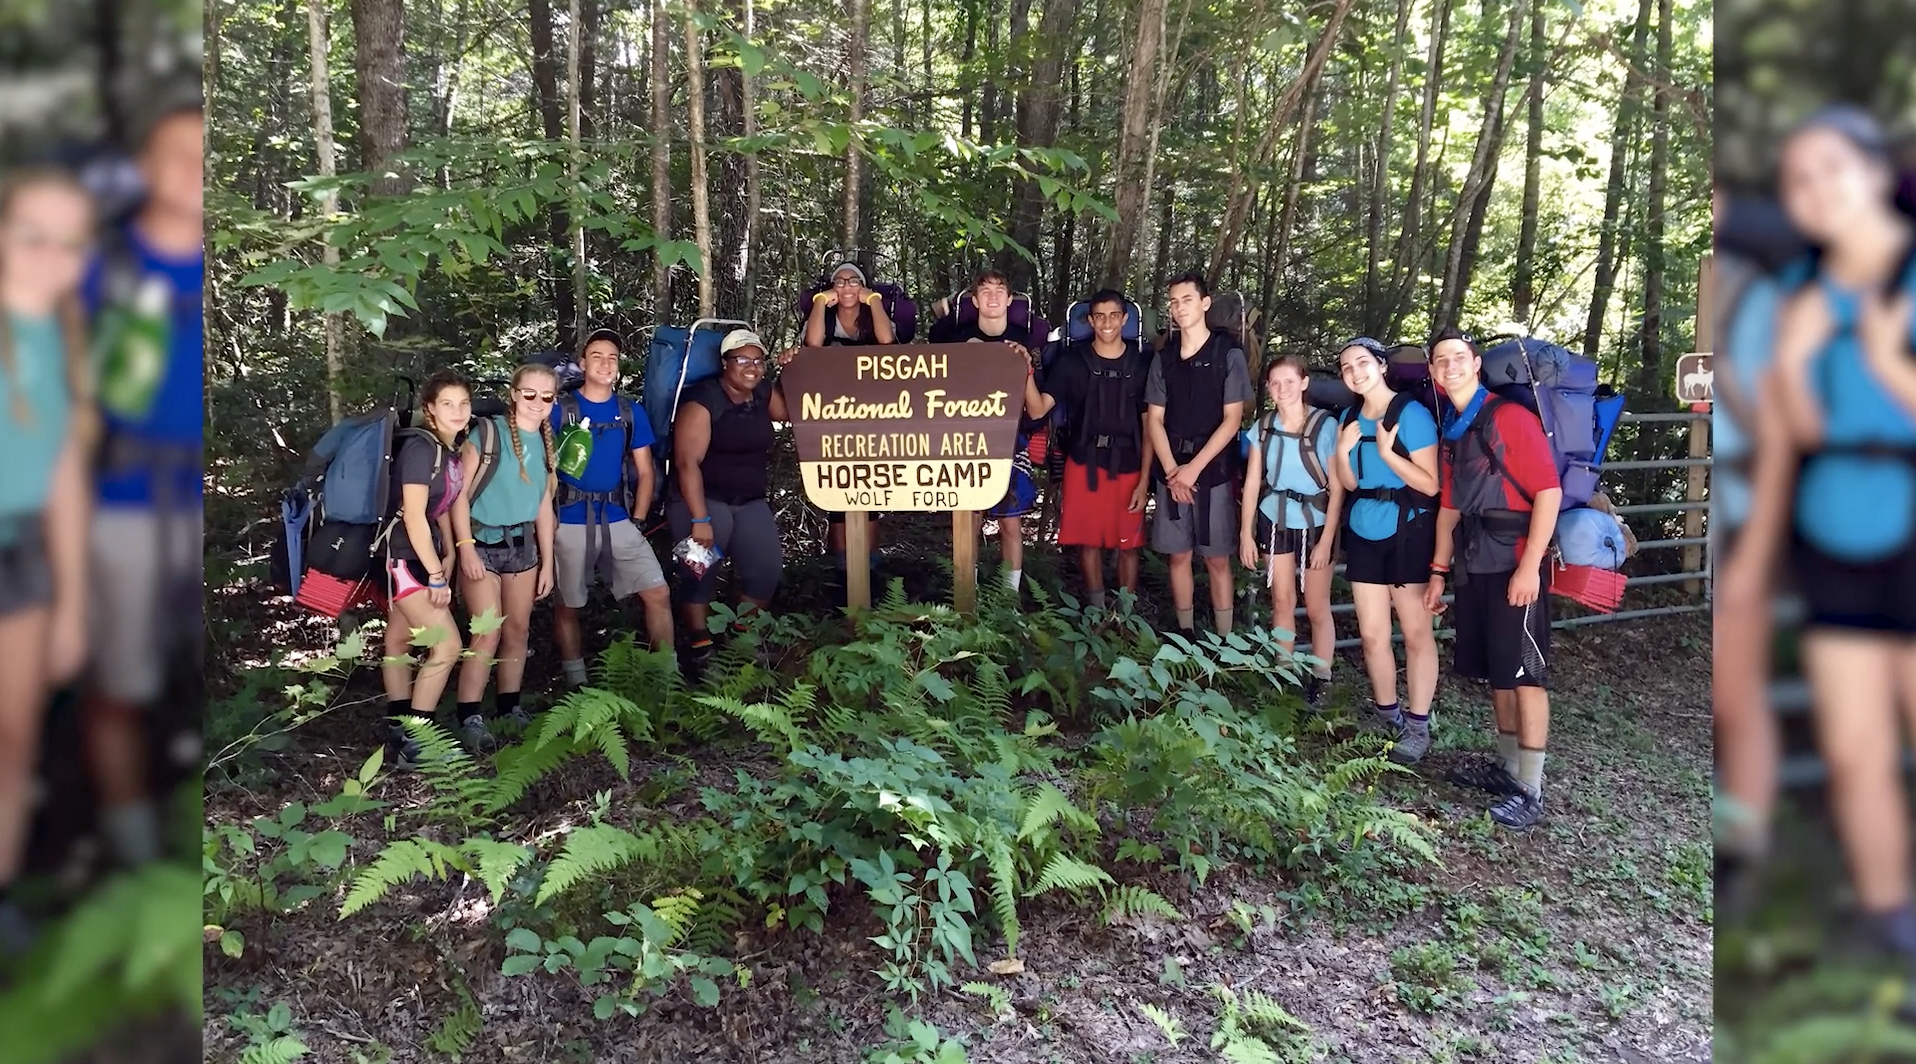 11th grade students on a trip to Pisgah National Forest